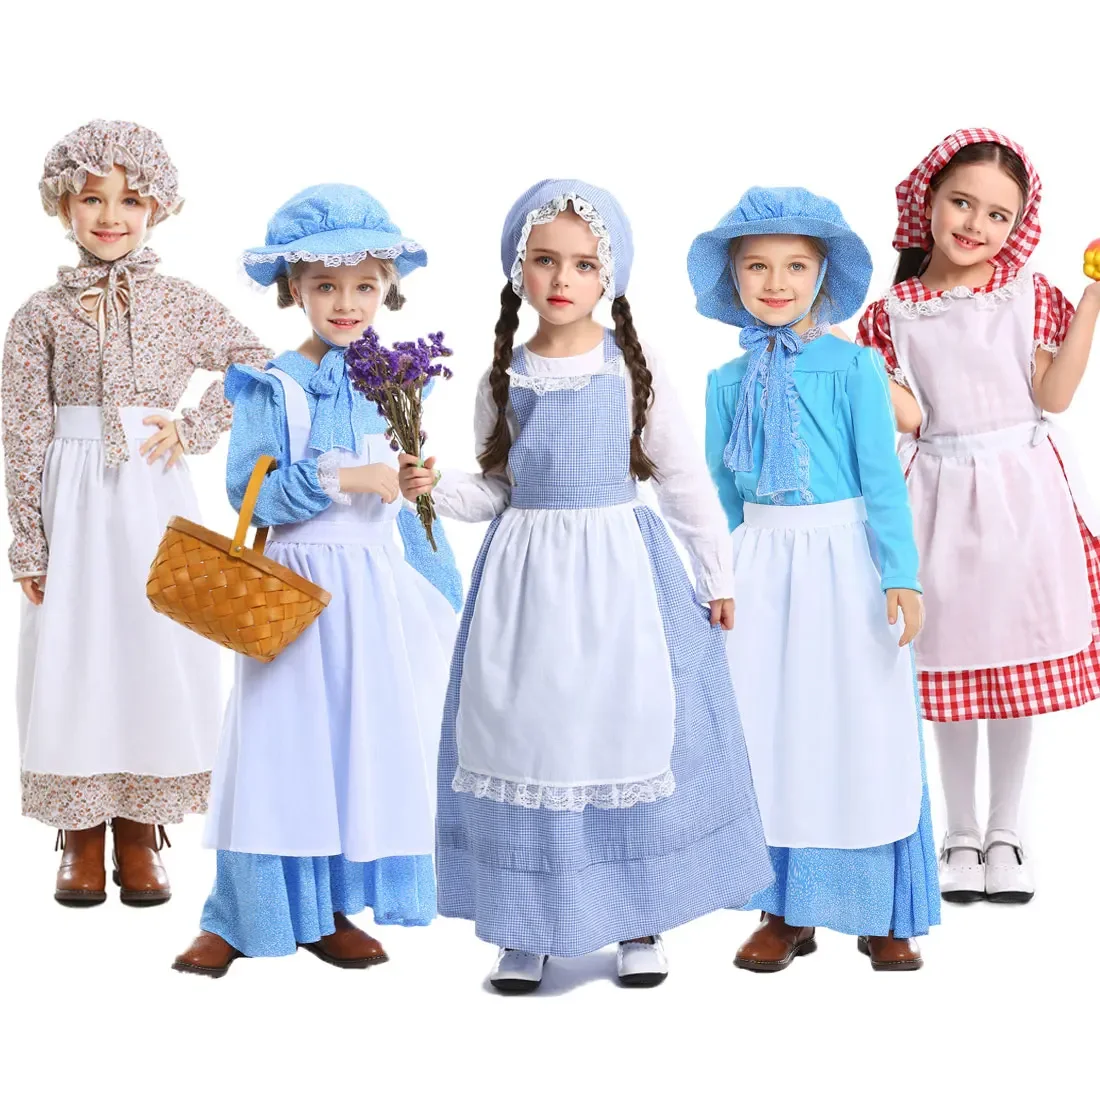 

Lovely Early America Colonial Village Pioneer Girl Costume Halloween Costumes Fancy Dress for Child Kids Teen Girls